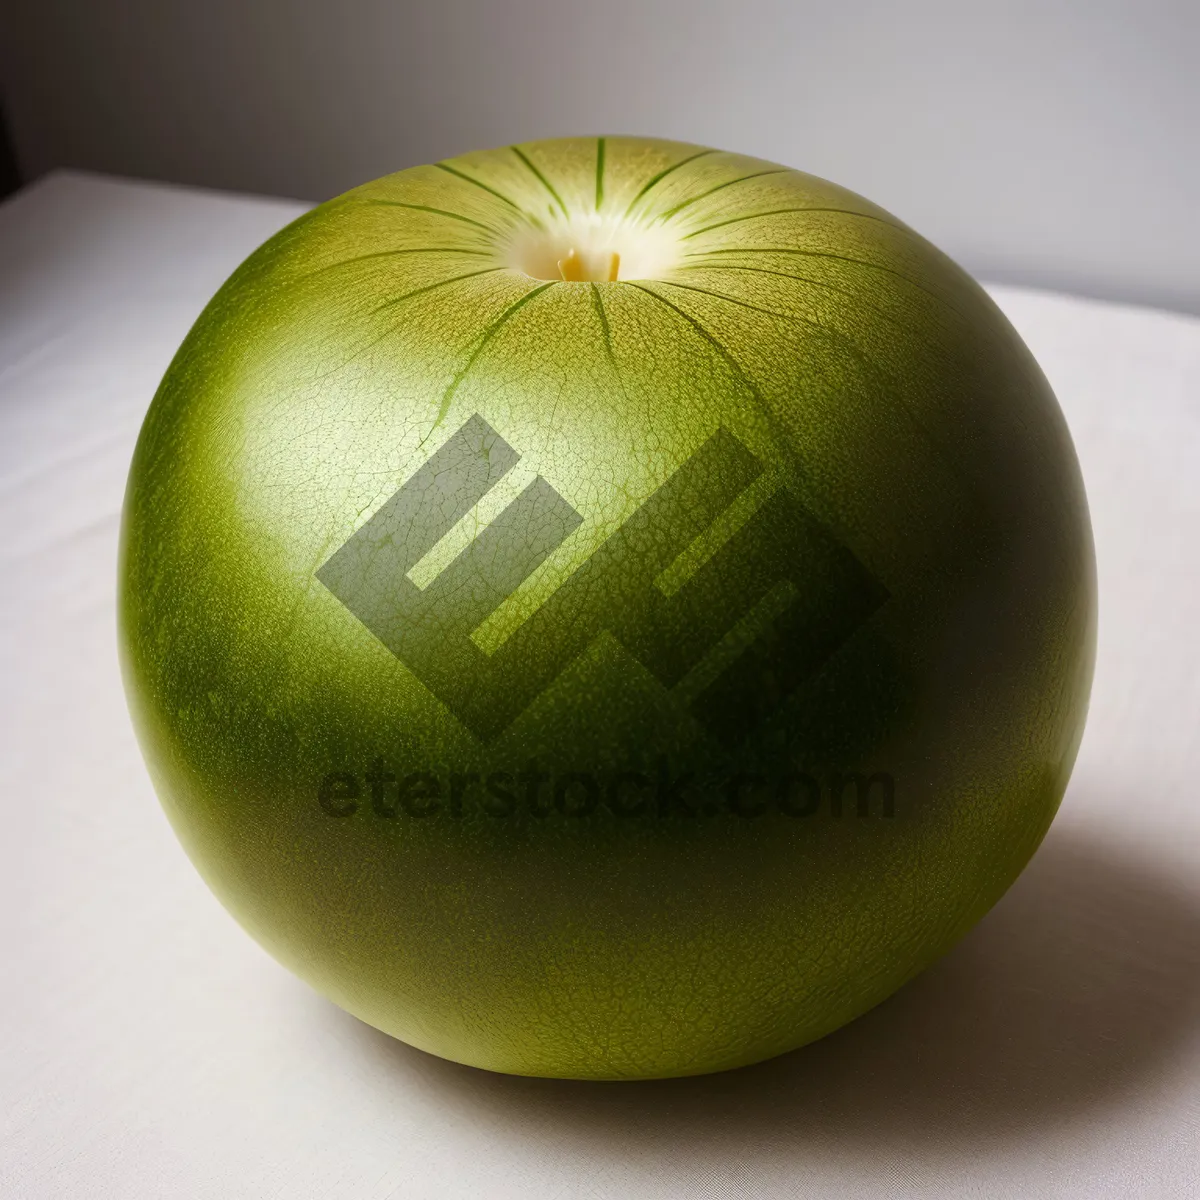 Picture of Juicy Granny Smith Apple - Fresh and Healthy Snack Option